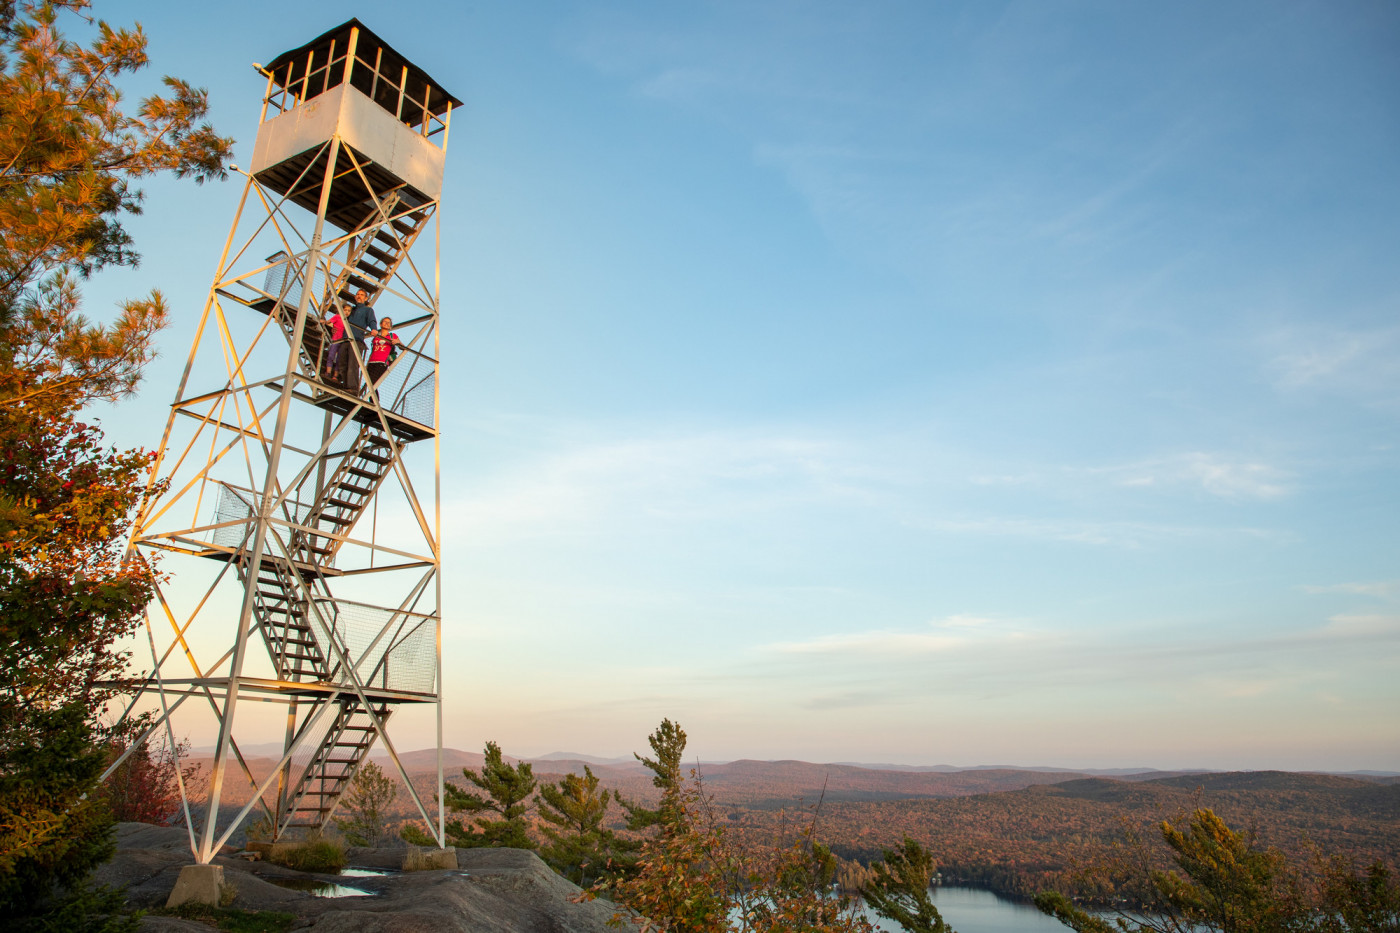 A fire tower stands out on a mountain summit